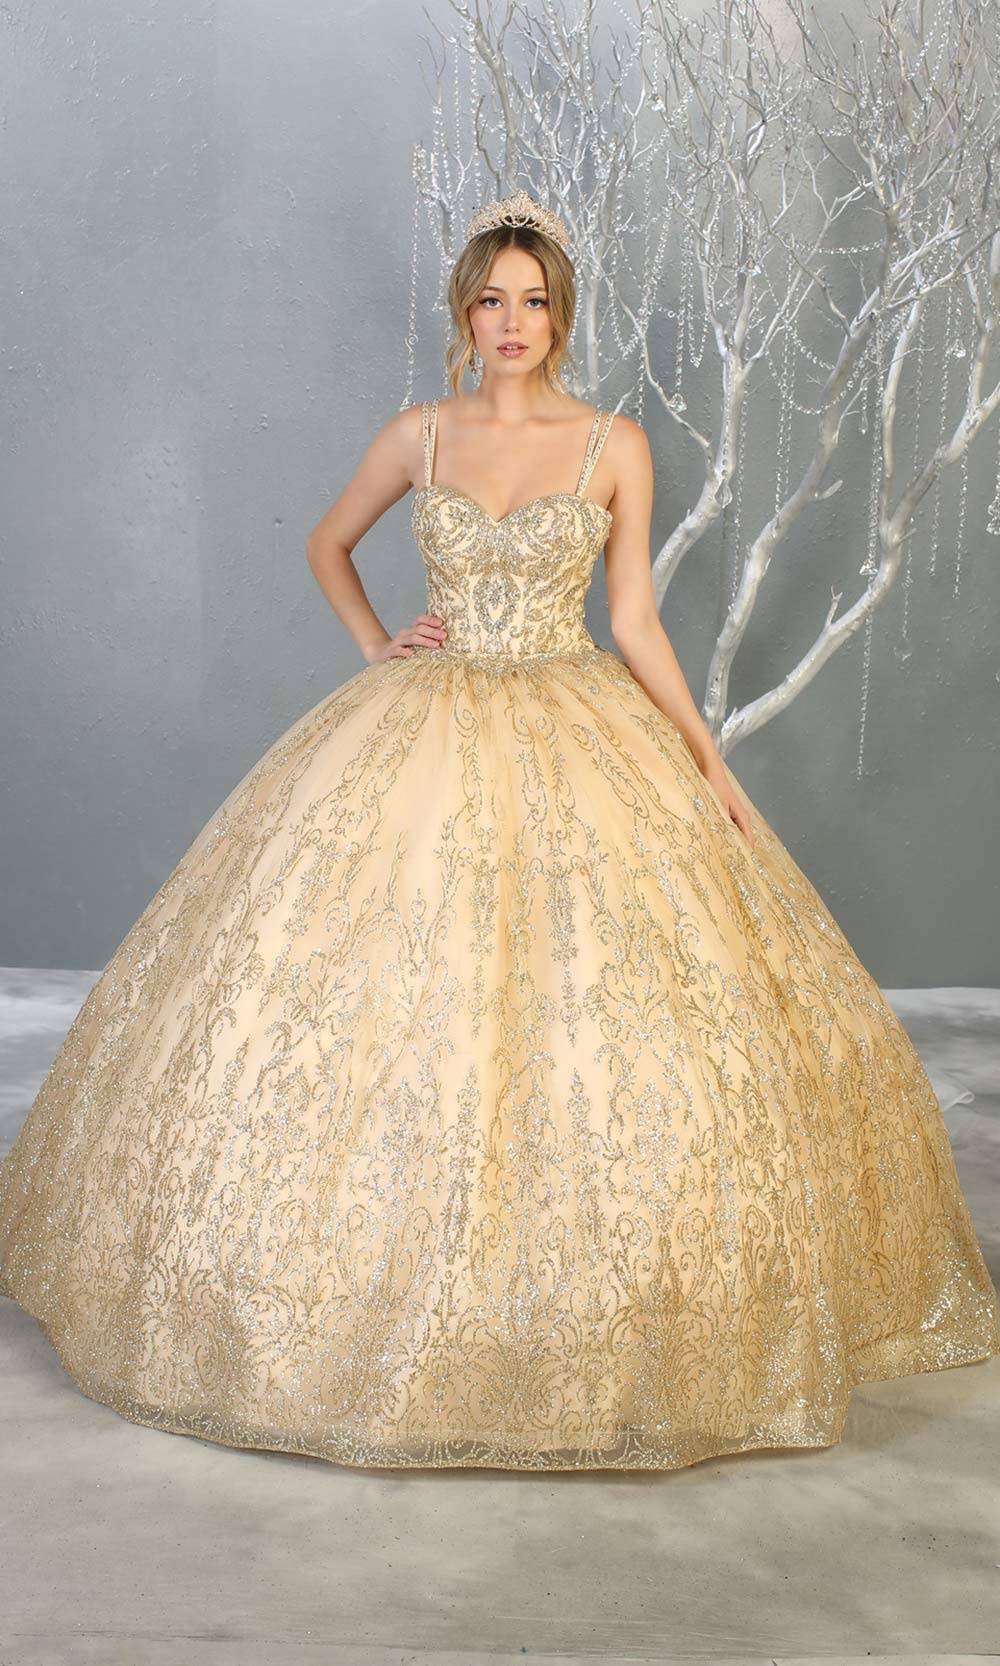 Mayqueen LK145 champagne quinceanera ball gown w/glittery skirt & beaded top. This light gold ball gown is perfect for engagement dress, wedding reception, indowestern party gown, sweet 16, debut, sweet 15, sweet 18. Plus sizes available for ballgowns